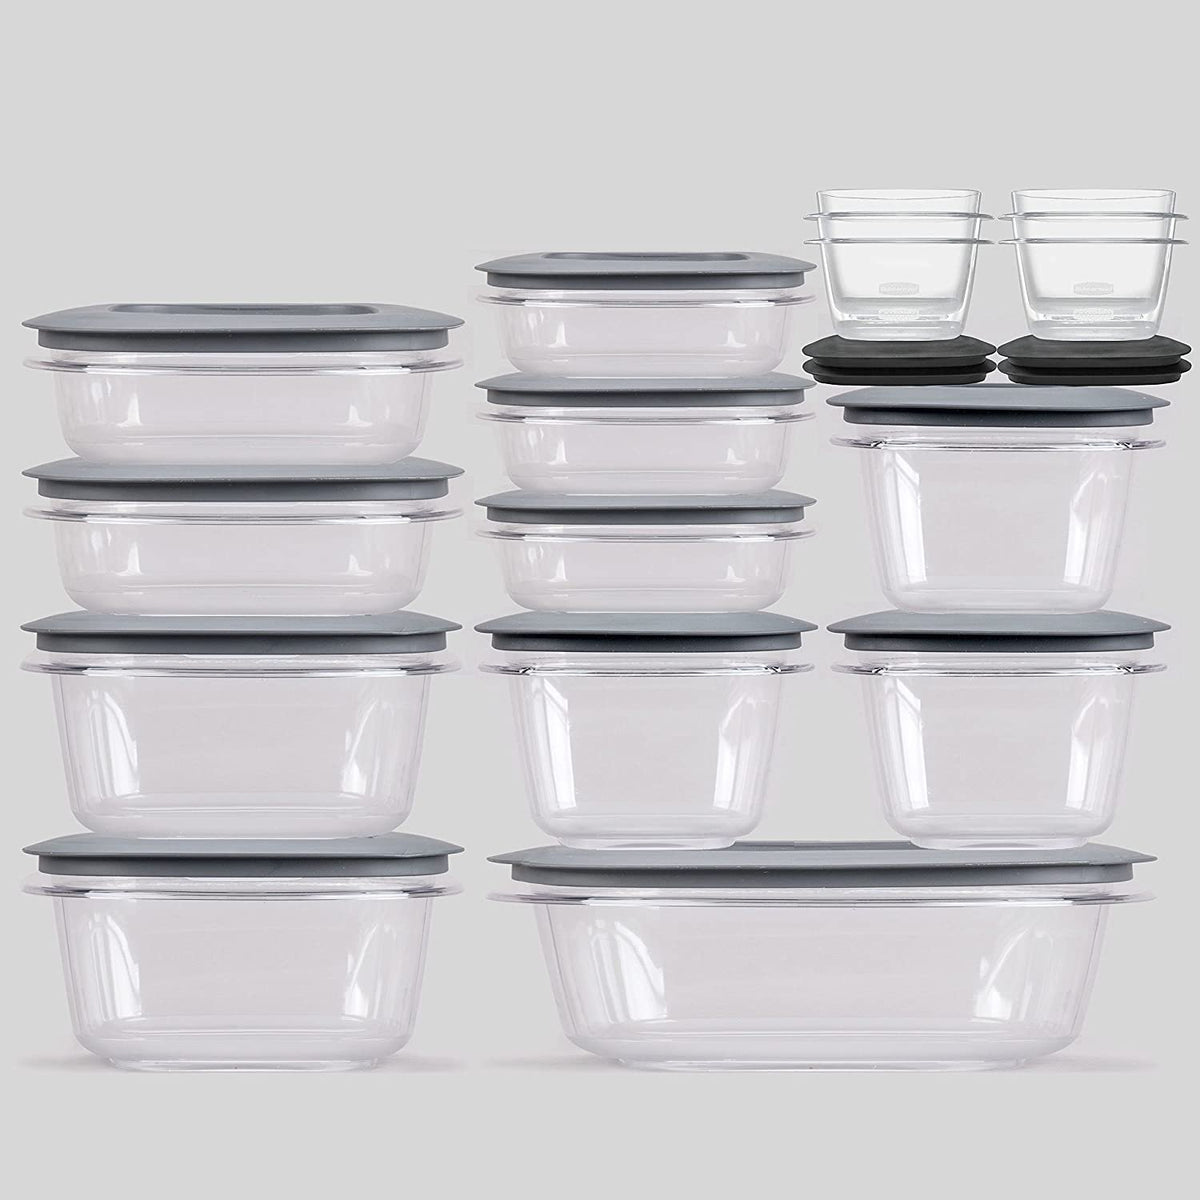 Rubbermaid Container, Crystal Clear & Stain Resistant, Premier, 3 Cup, Shop